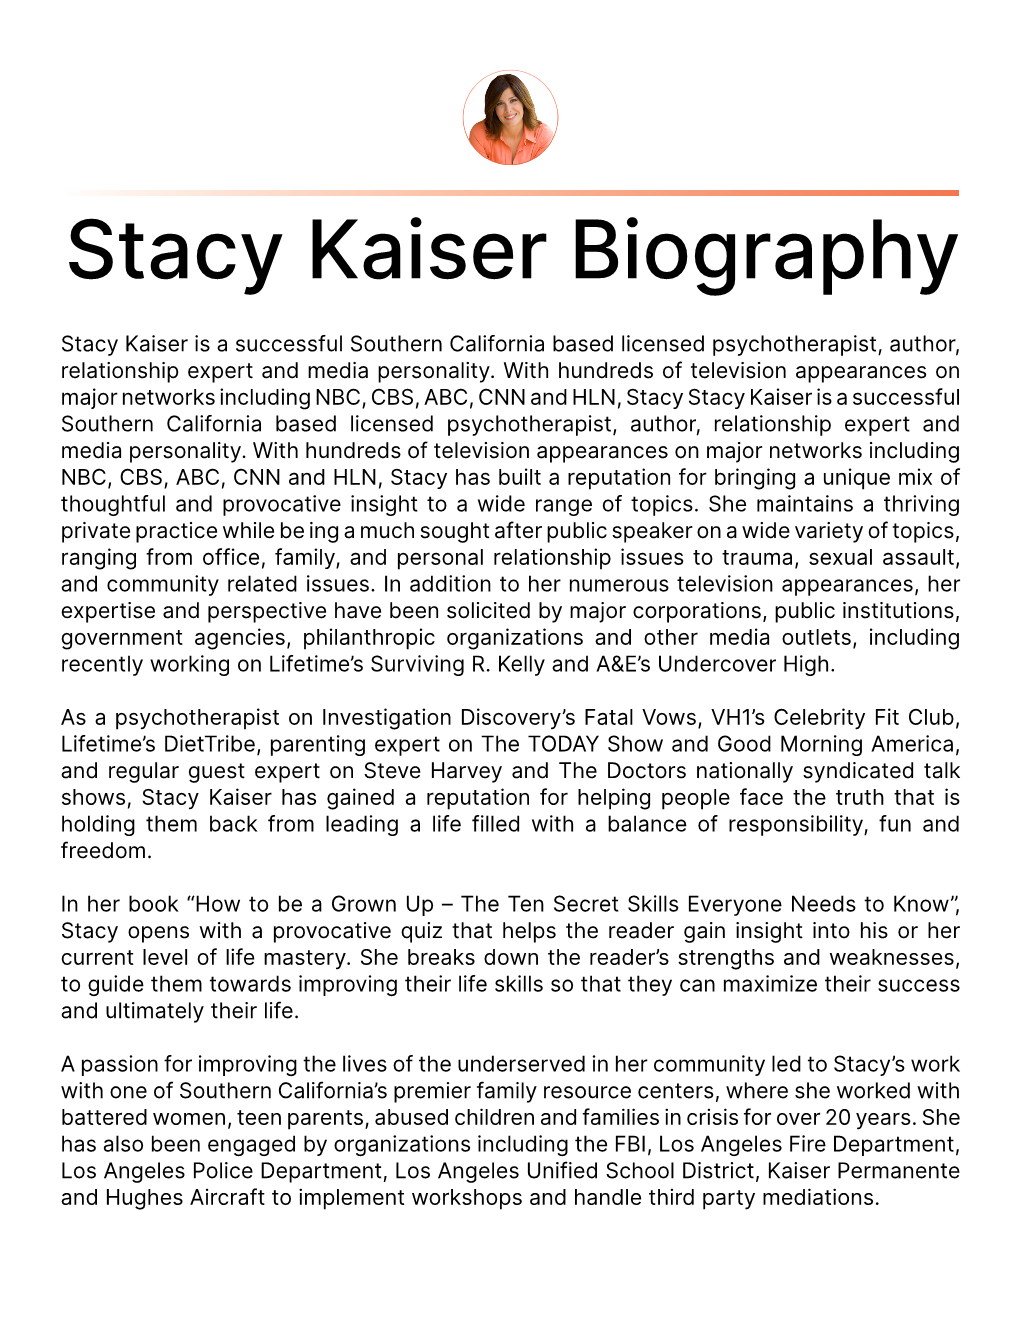 Stacy Kaiser Biography